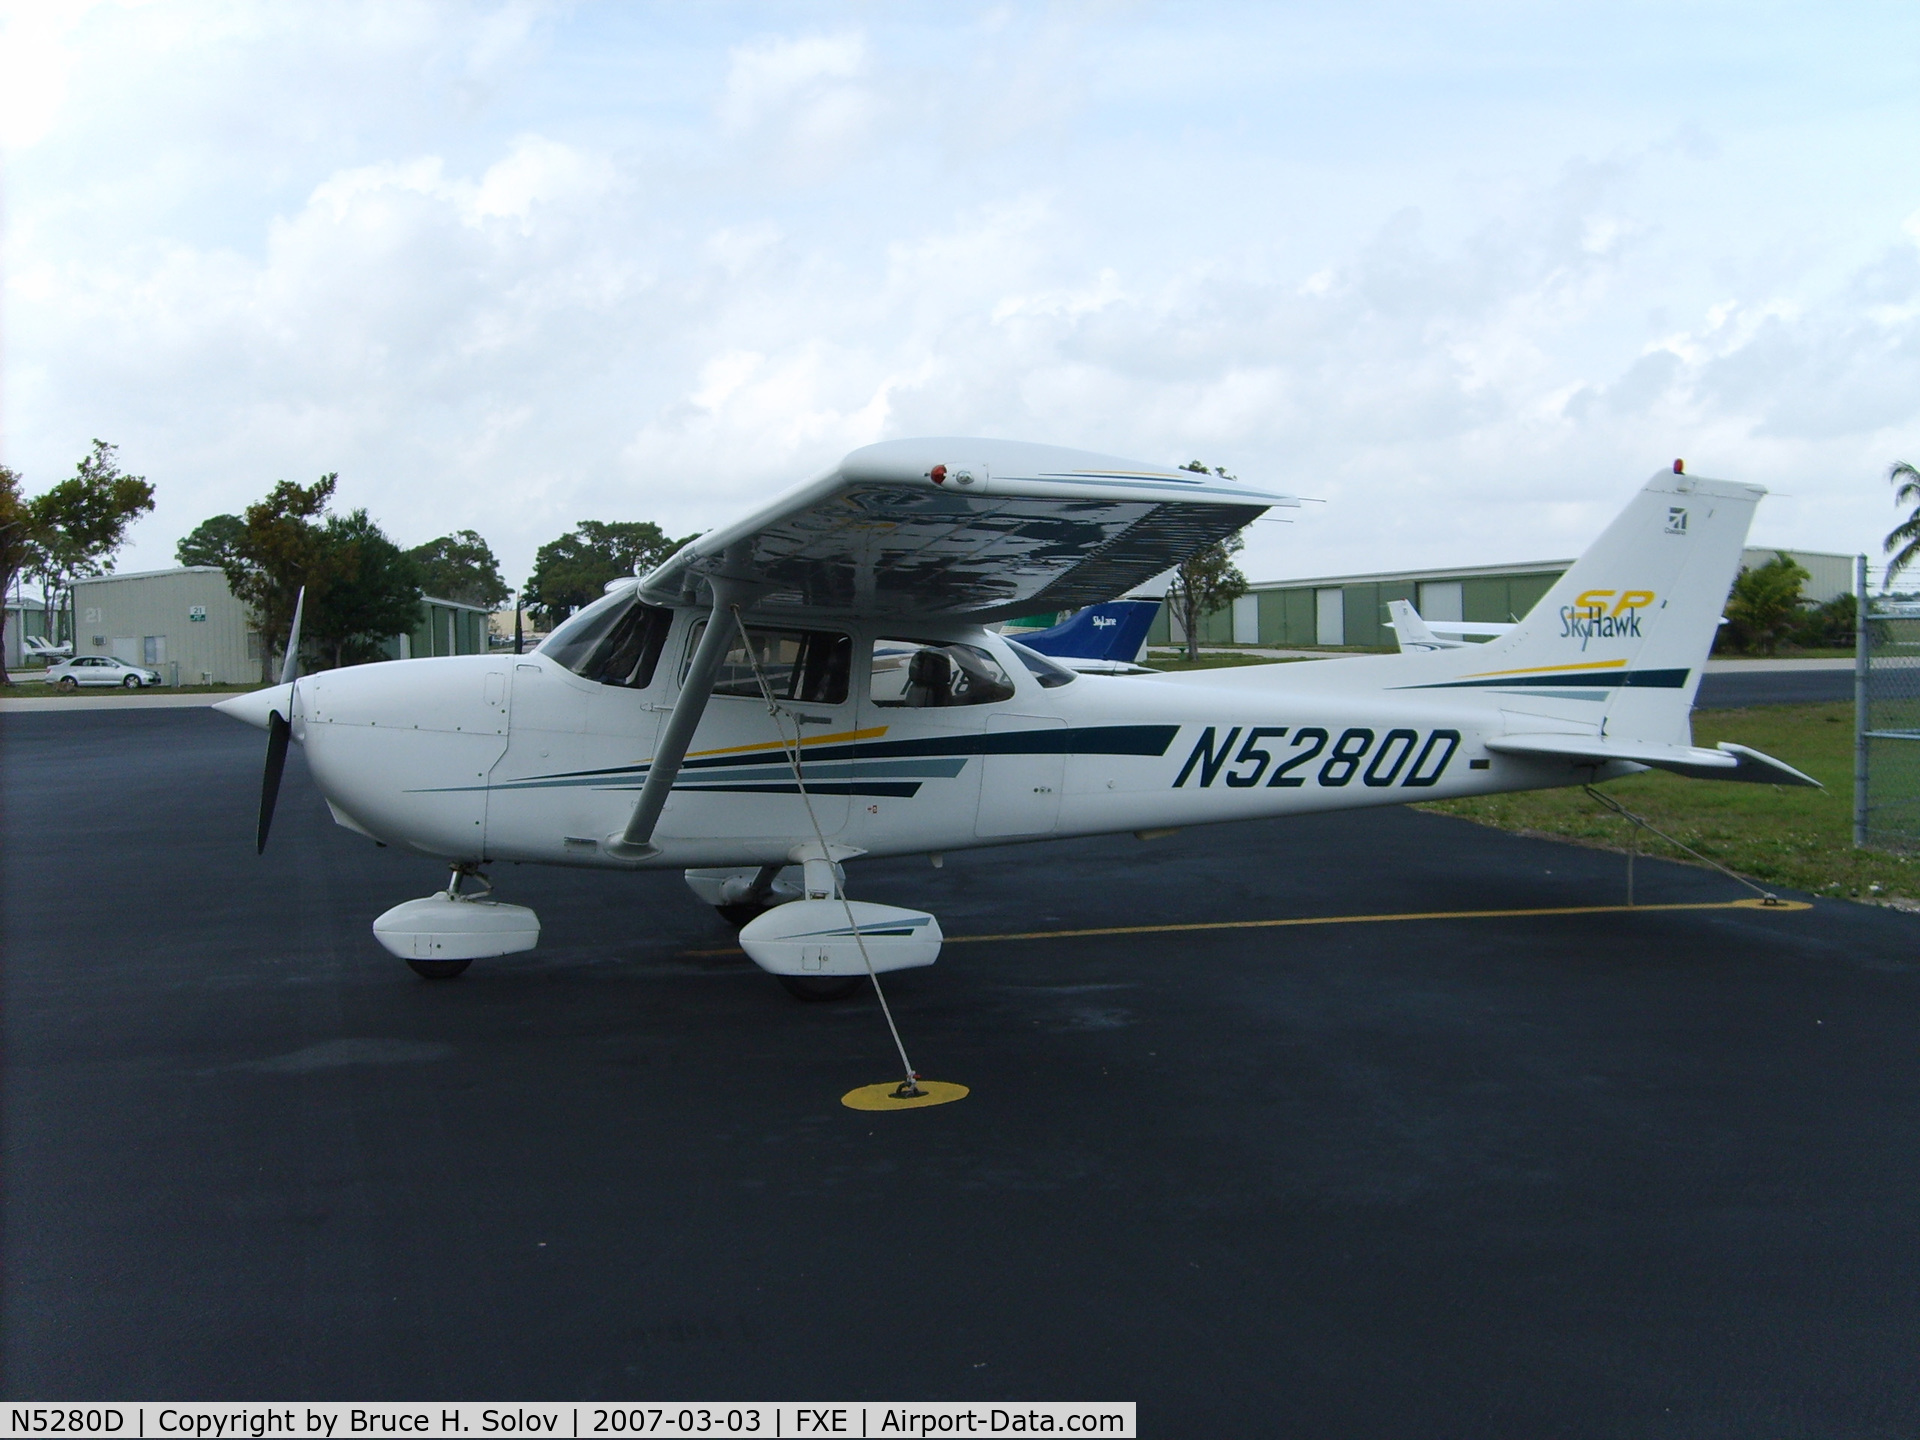 N5280D, 2002 Cessna 172S C/N 172S9212, I have flown this one too